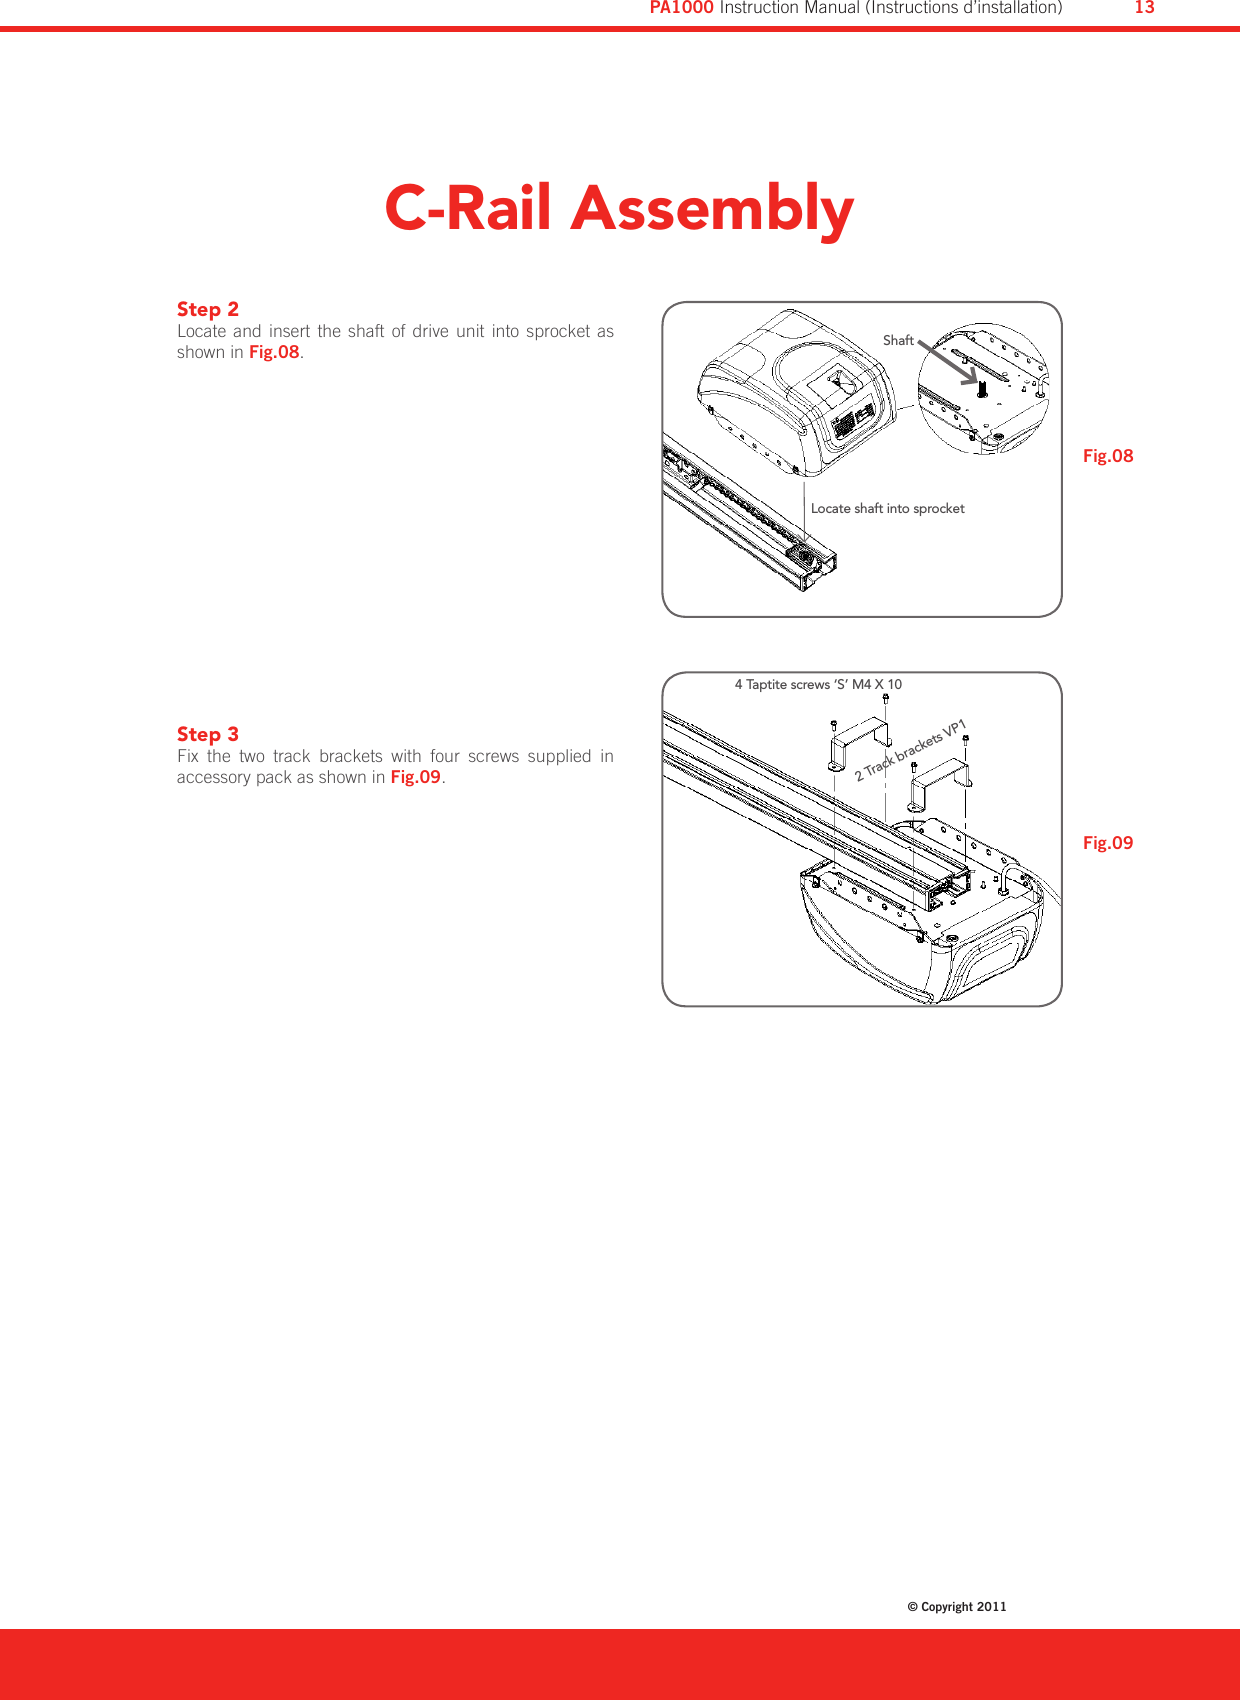 C-Rail AssemblyStep 2  Locate  and  insert  the  shaft  of  drive  unit  into  sprocket  as shown in Fig.08.Step 3 Fix  the  two  track  brackets  with  four  screws  supplied  in accessory pack as shown in Fig.09.Locate shaft into sprocketShaft4 Taptite screws ‘S’ M4 X 102 Track brackets VP1Fig.09Fig.08Diamond PD Power Drive : Instruction Manual© Copyright 201113PA1000 Instruction Manual (Instructions d’installation)